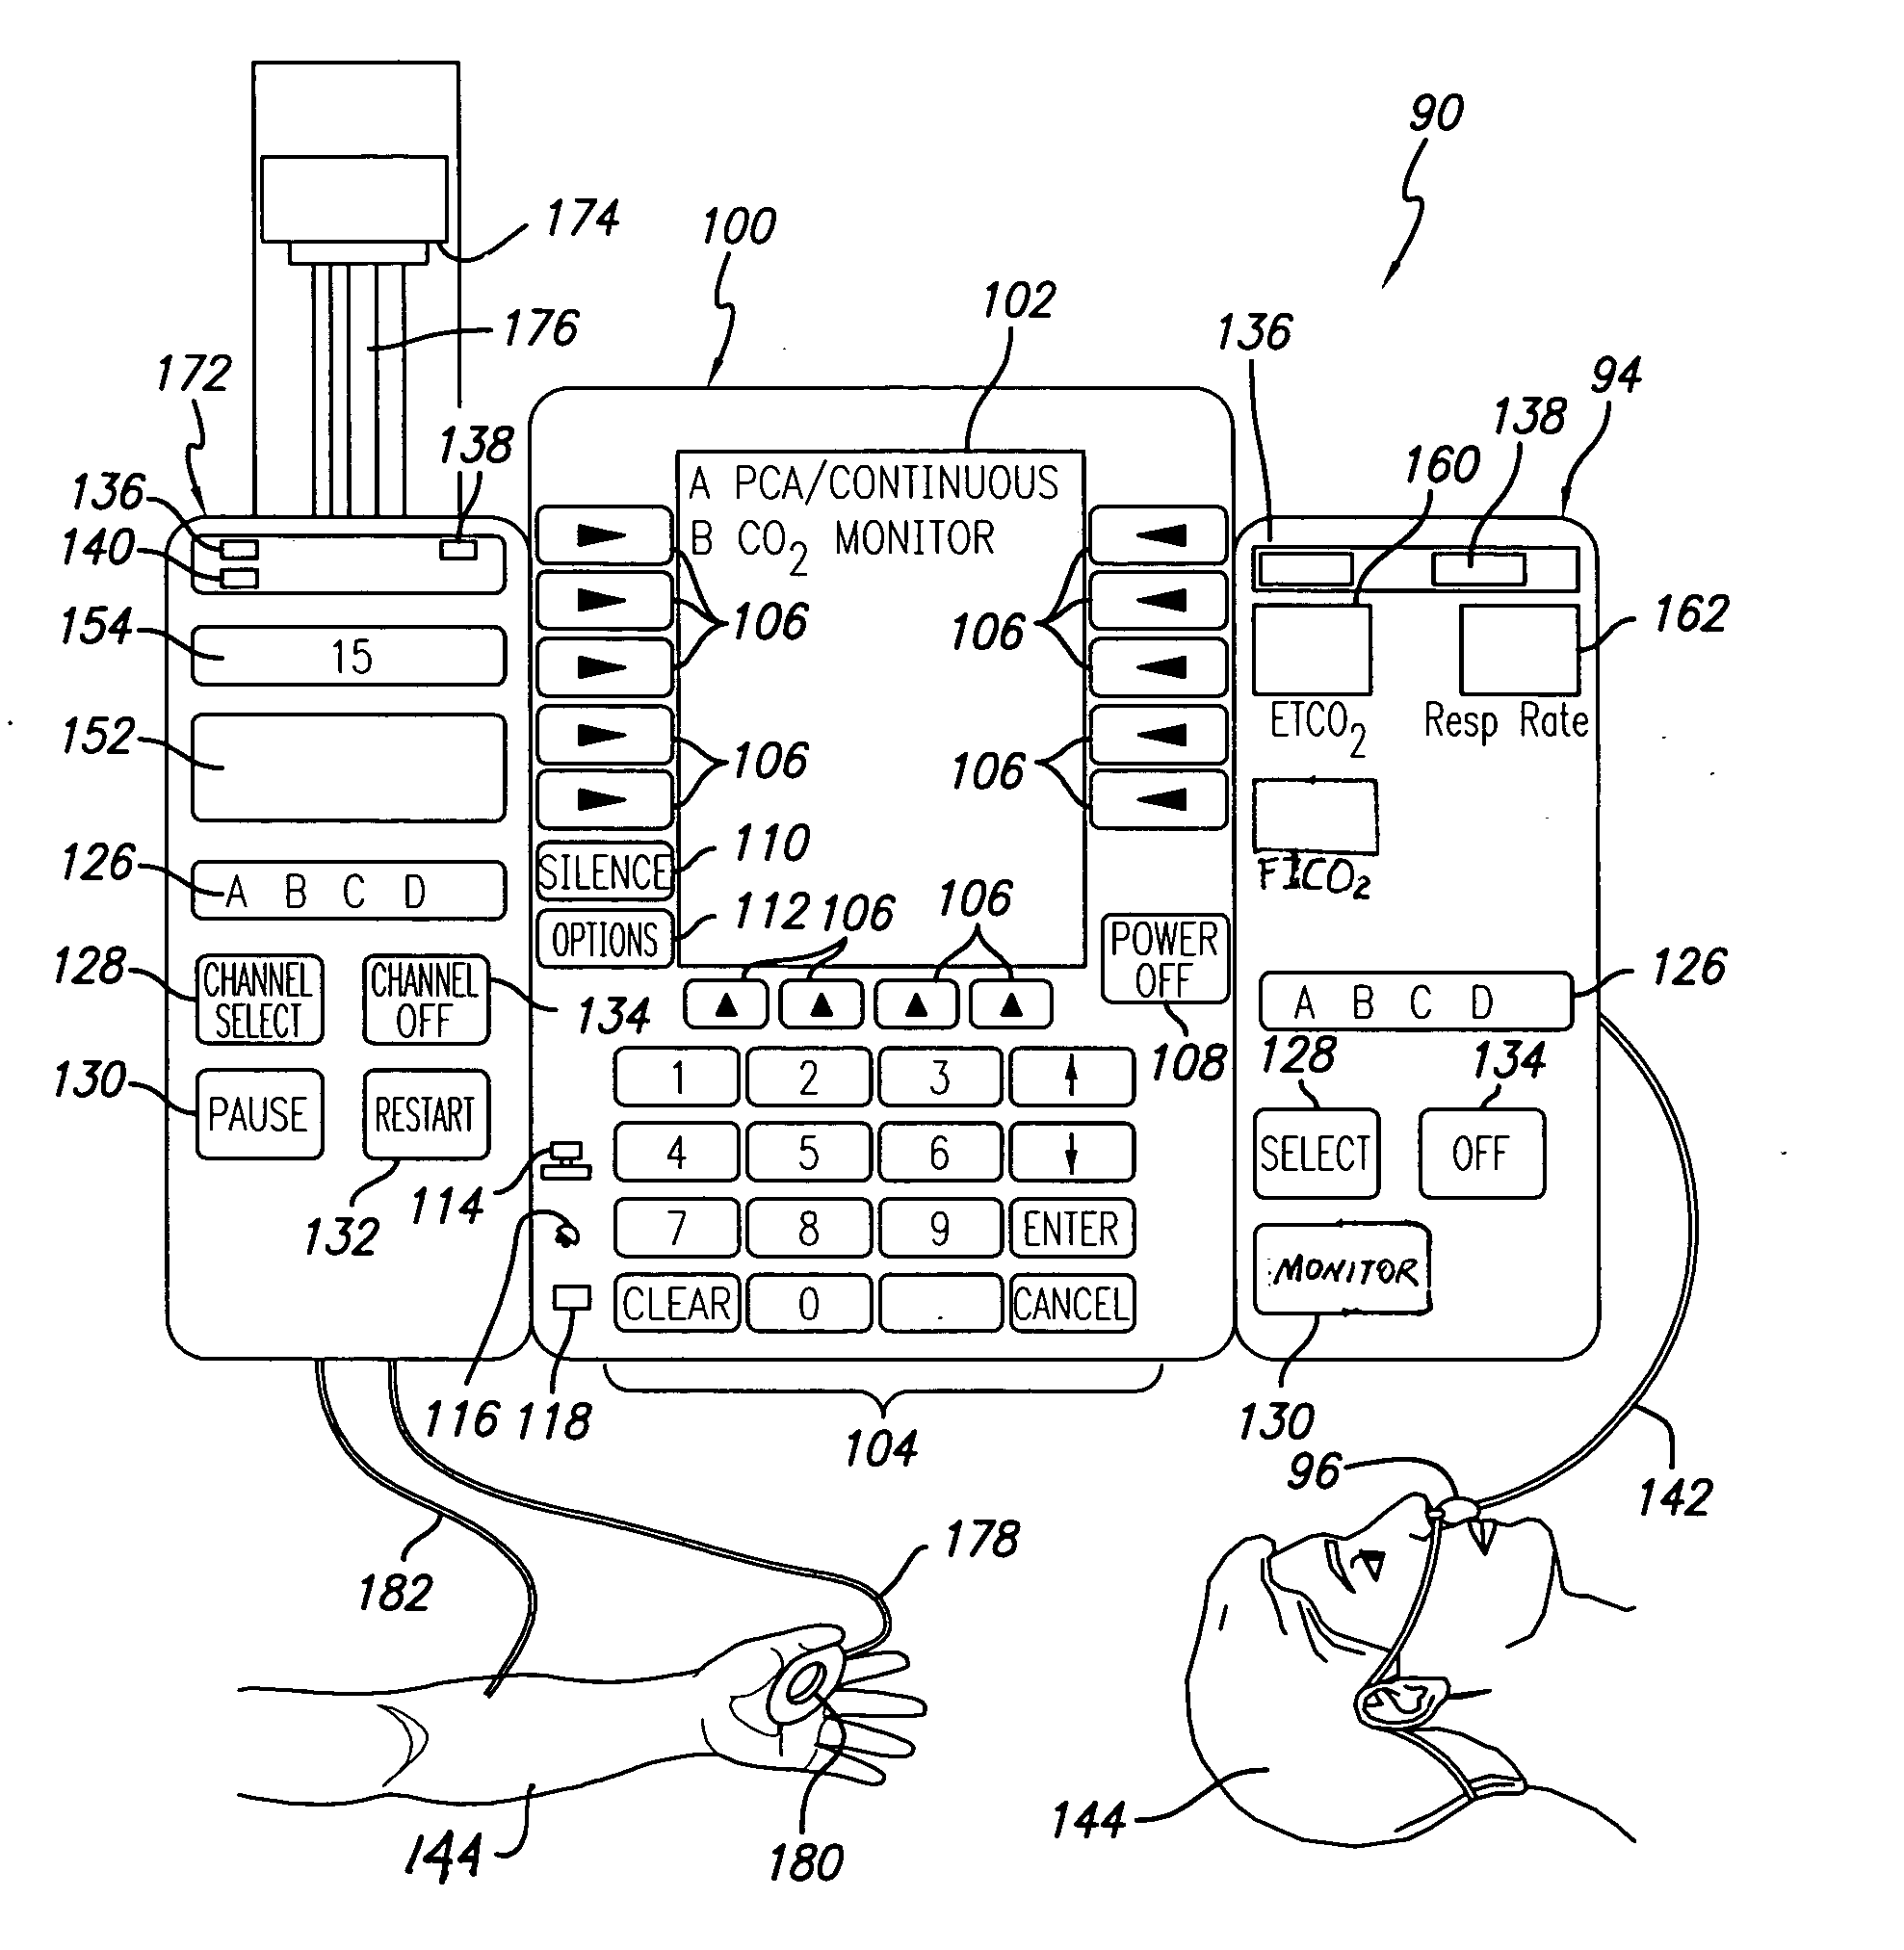 Patient-controlled analgesia with patient monitoring system and method